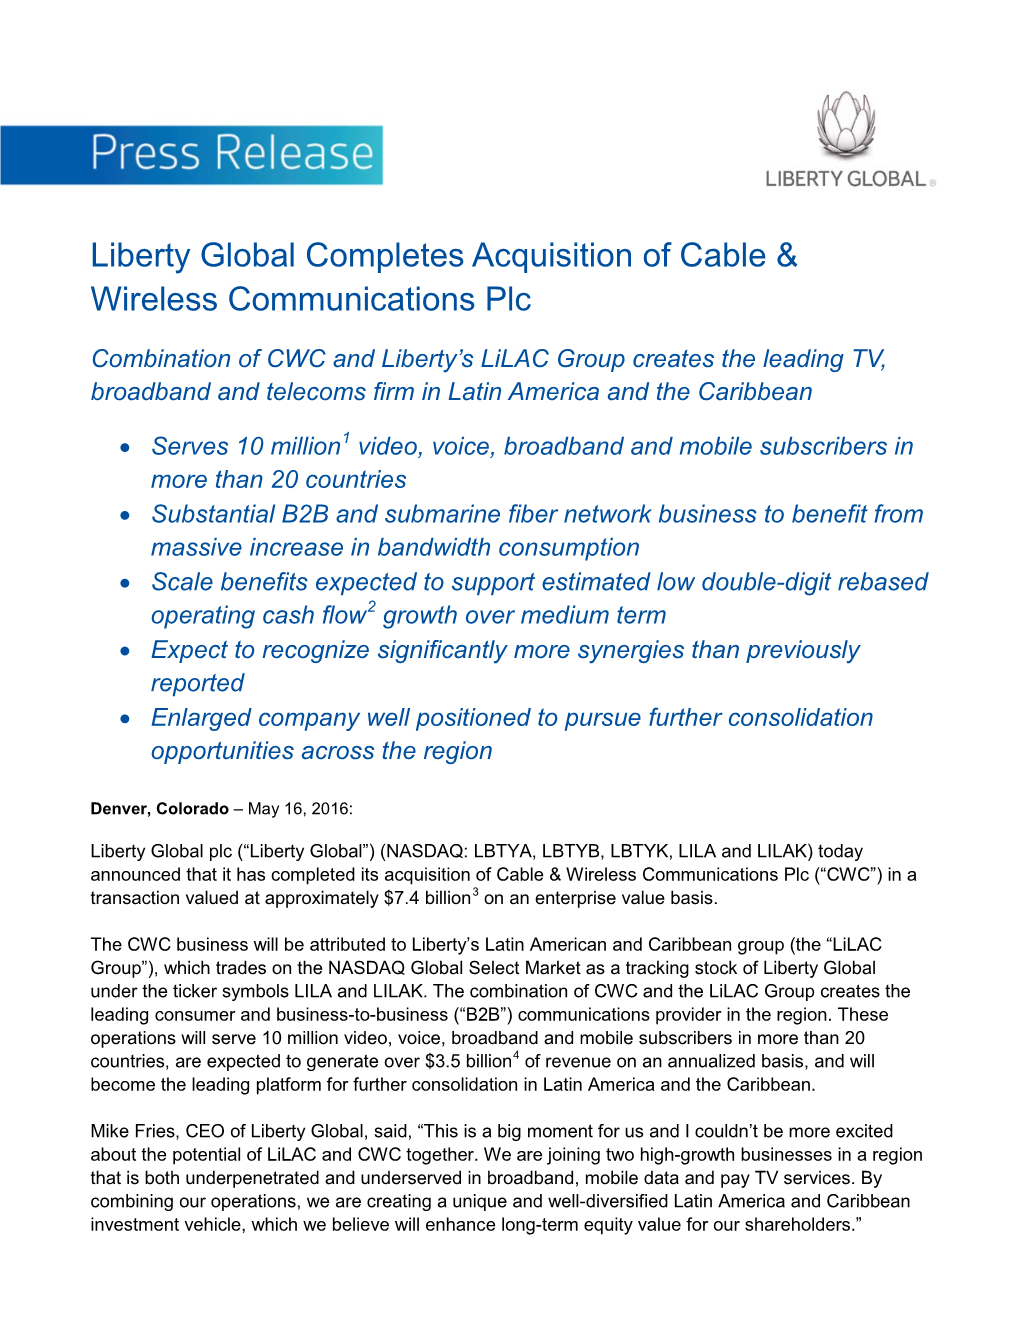 Liberty Global Completes Acquisition of Cable & Wireless